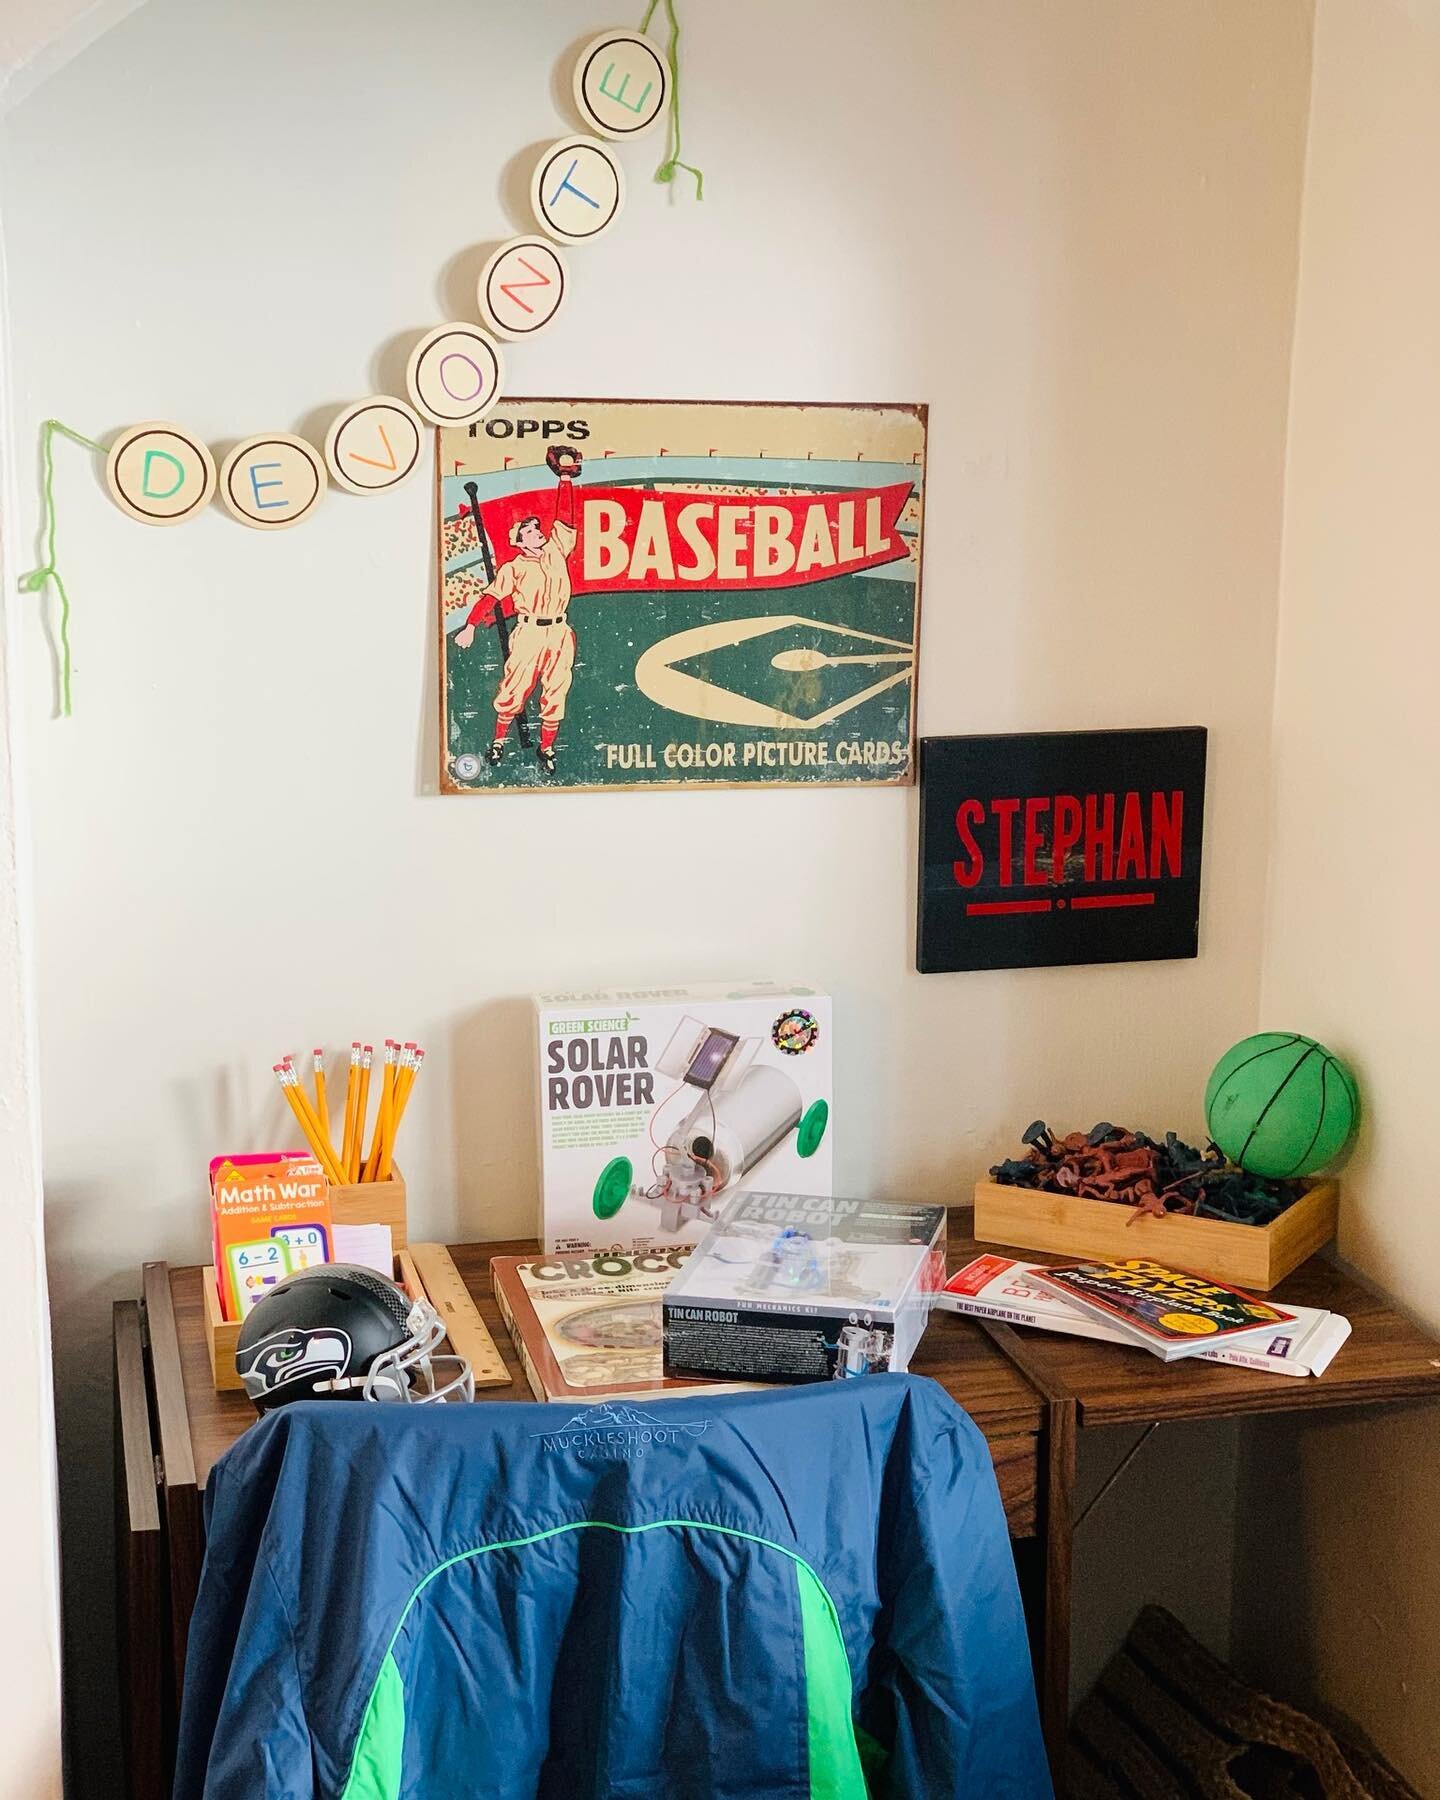 Swipe 👉🏼 to see the empty alcove our designers turned into this adorable desk setup.

Kids deserve their own spaces to live, study &amp; play. They&rsquo;re always most excited to see their own names displayed, one of our signature decorations. 🧡